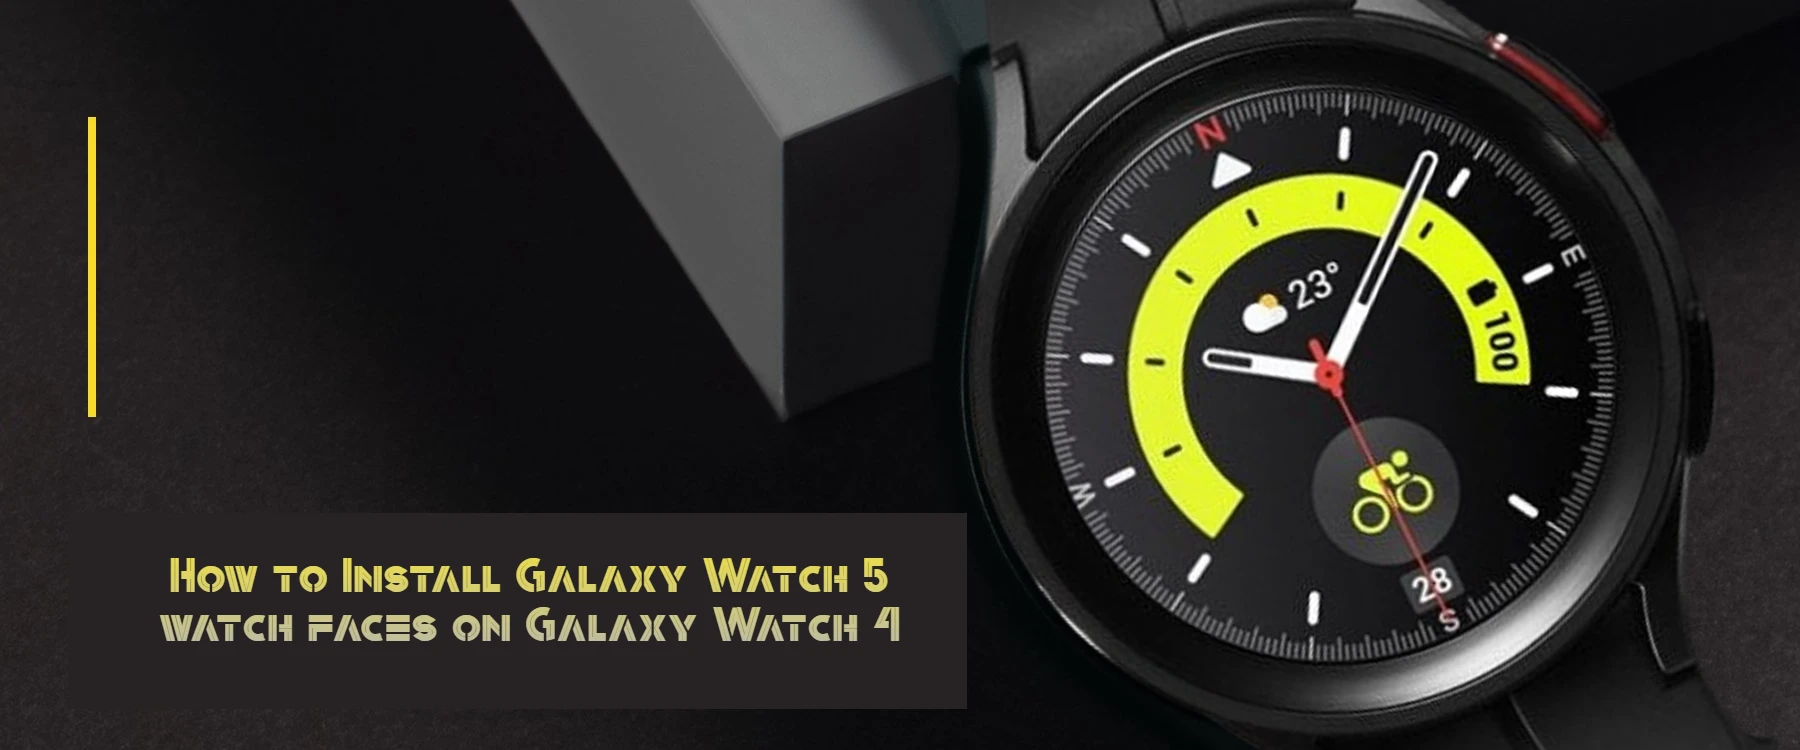 How to Install Galaxy Watch 5 watch faces on Galaxy Watch 4